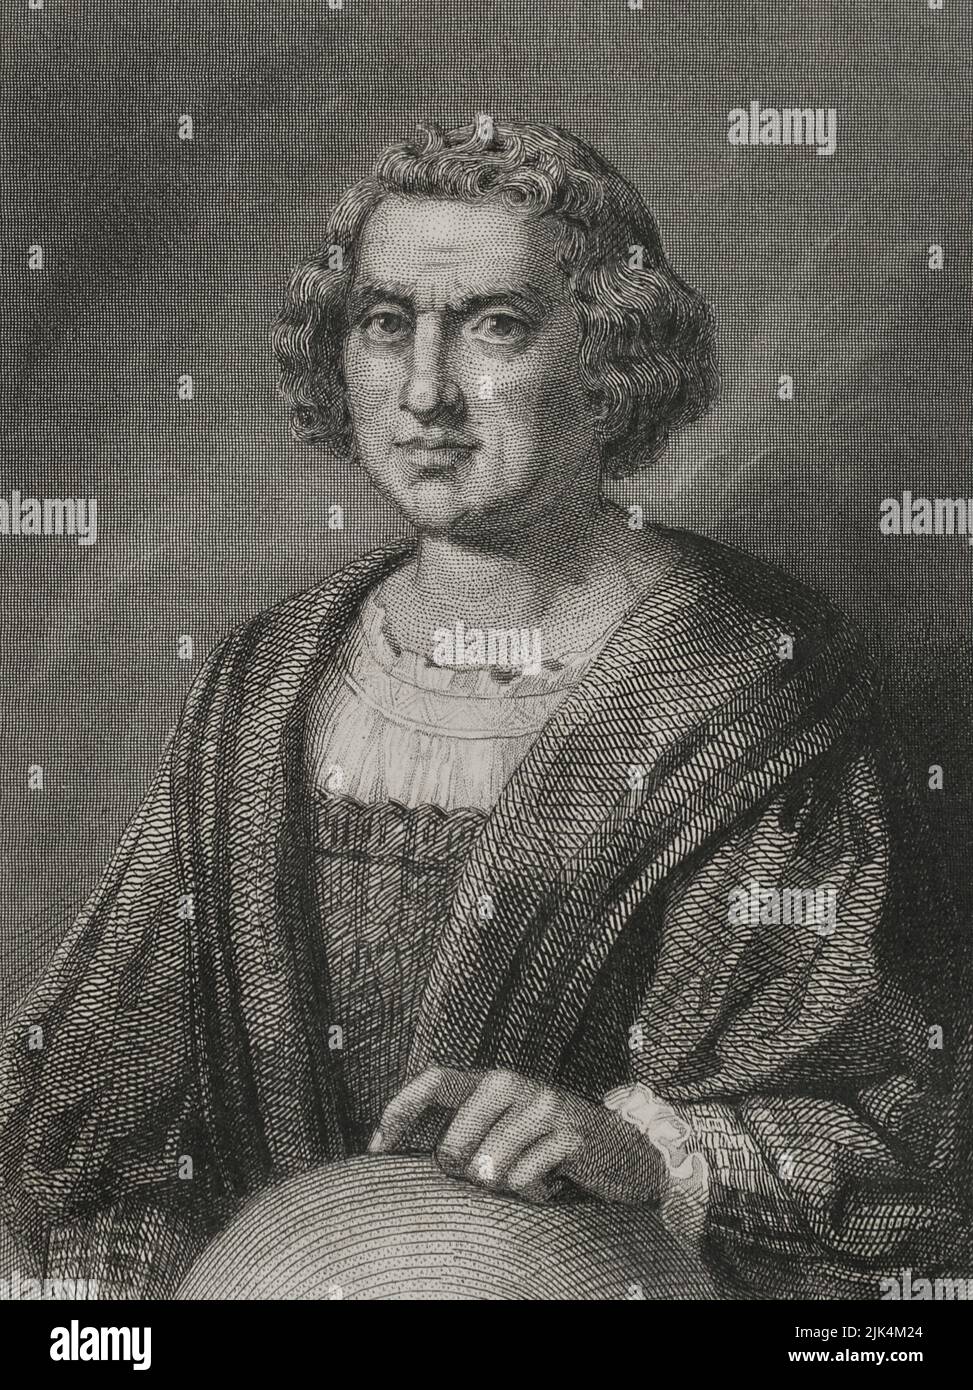 Christopher Columbus (1451-1506). Navigator, cartographer and admiral. He served the Crown of Castile. Discoverer of America in 1492. Portrait. Engraving by Geoffroy. "Historia Universal", by César Cantú. Volume IV, 1856. Stock Photo